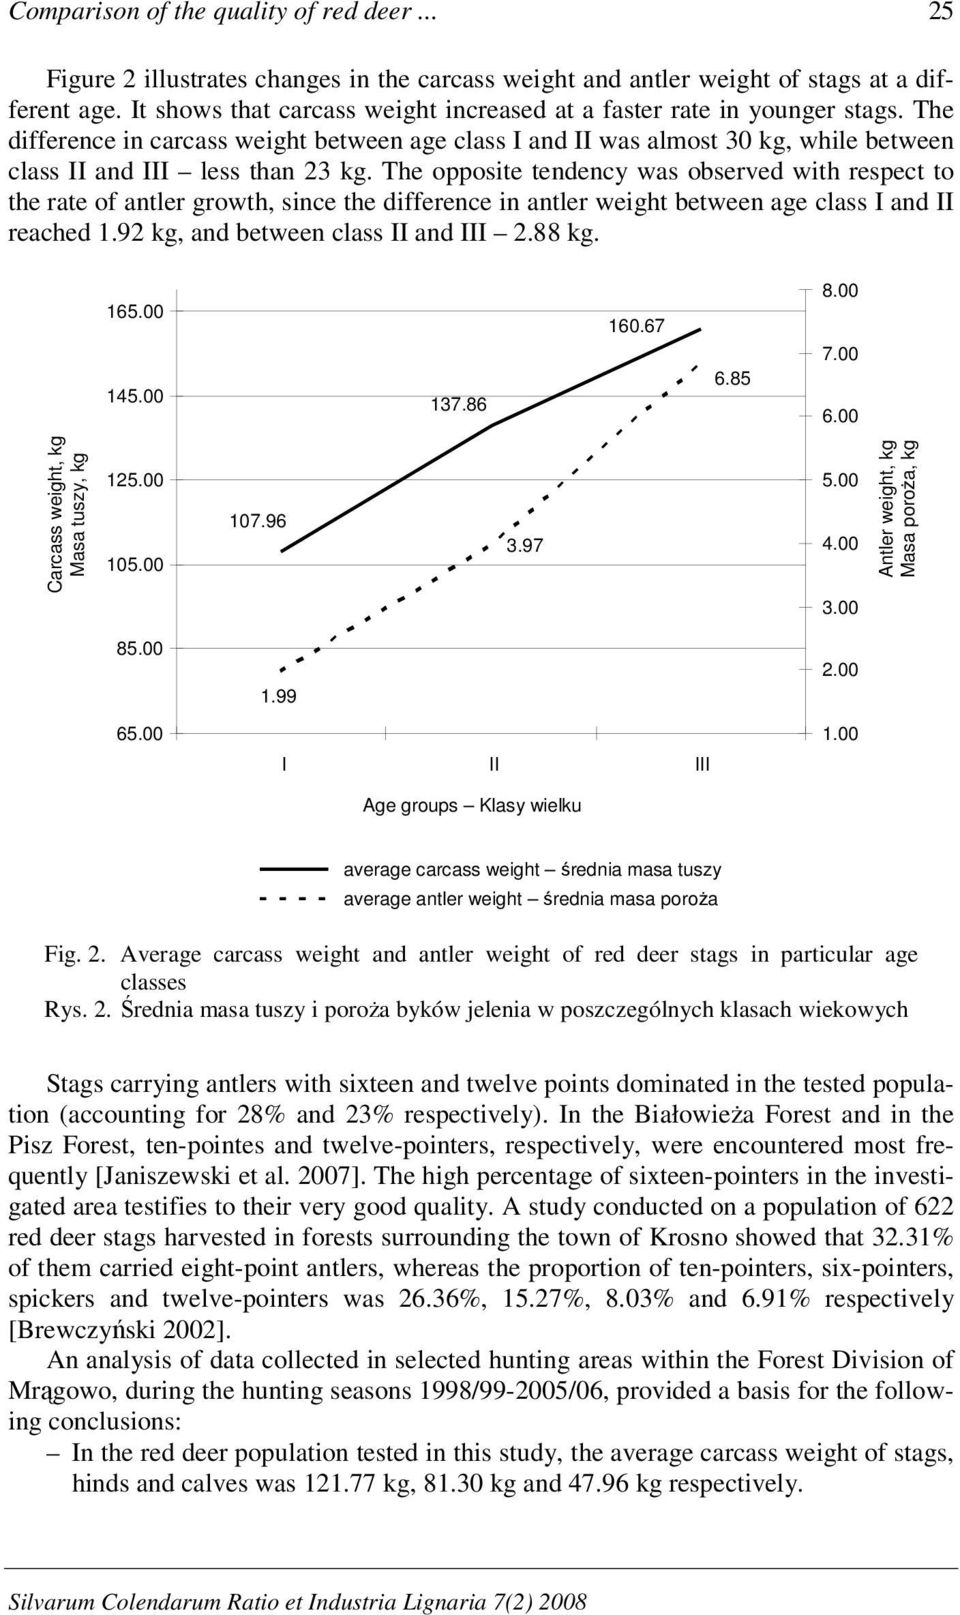 The opposite tendency was observed with respect to the rate of antler growth, since the difference in antler weight between age class I and II reached 1.92 kg, and between class II and III 2.88 kg.